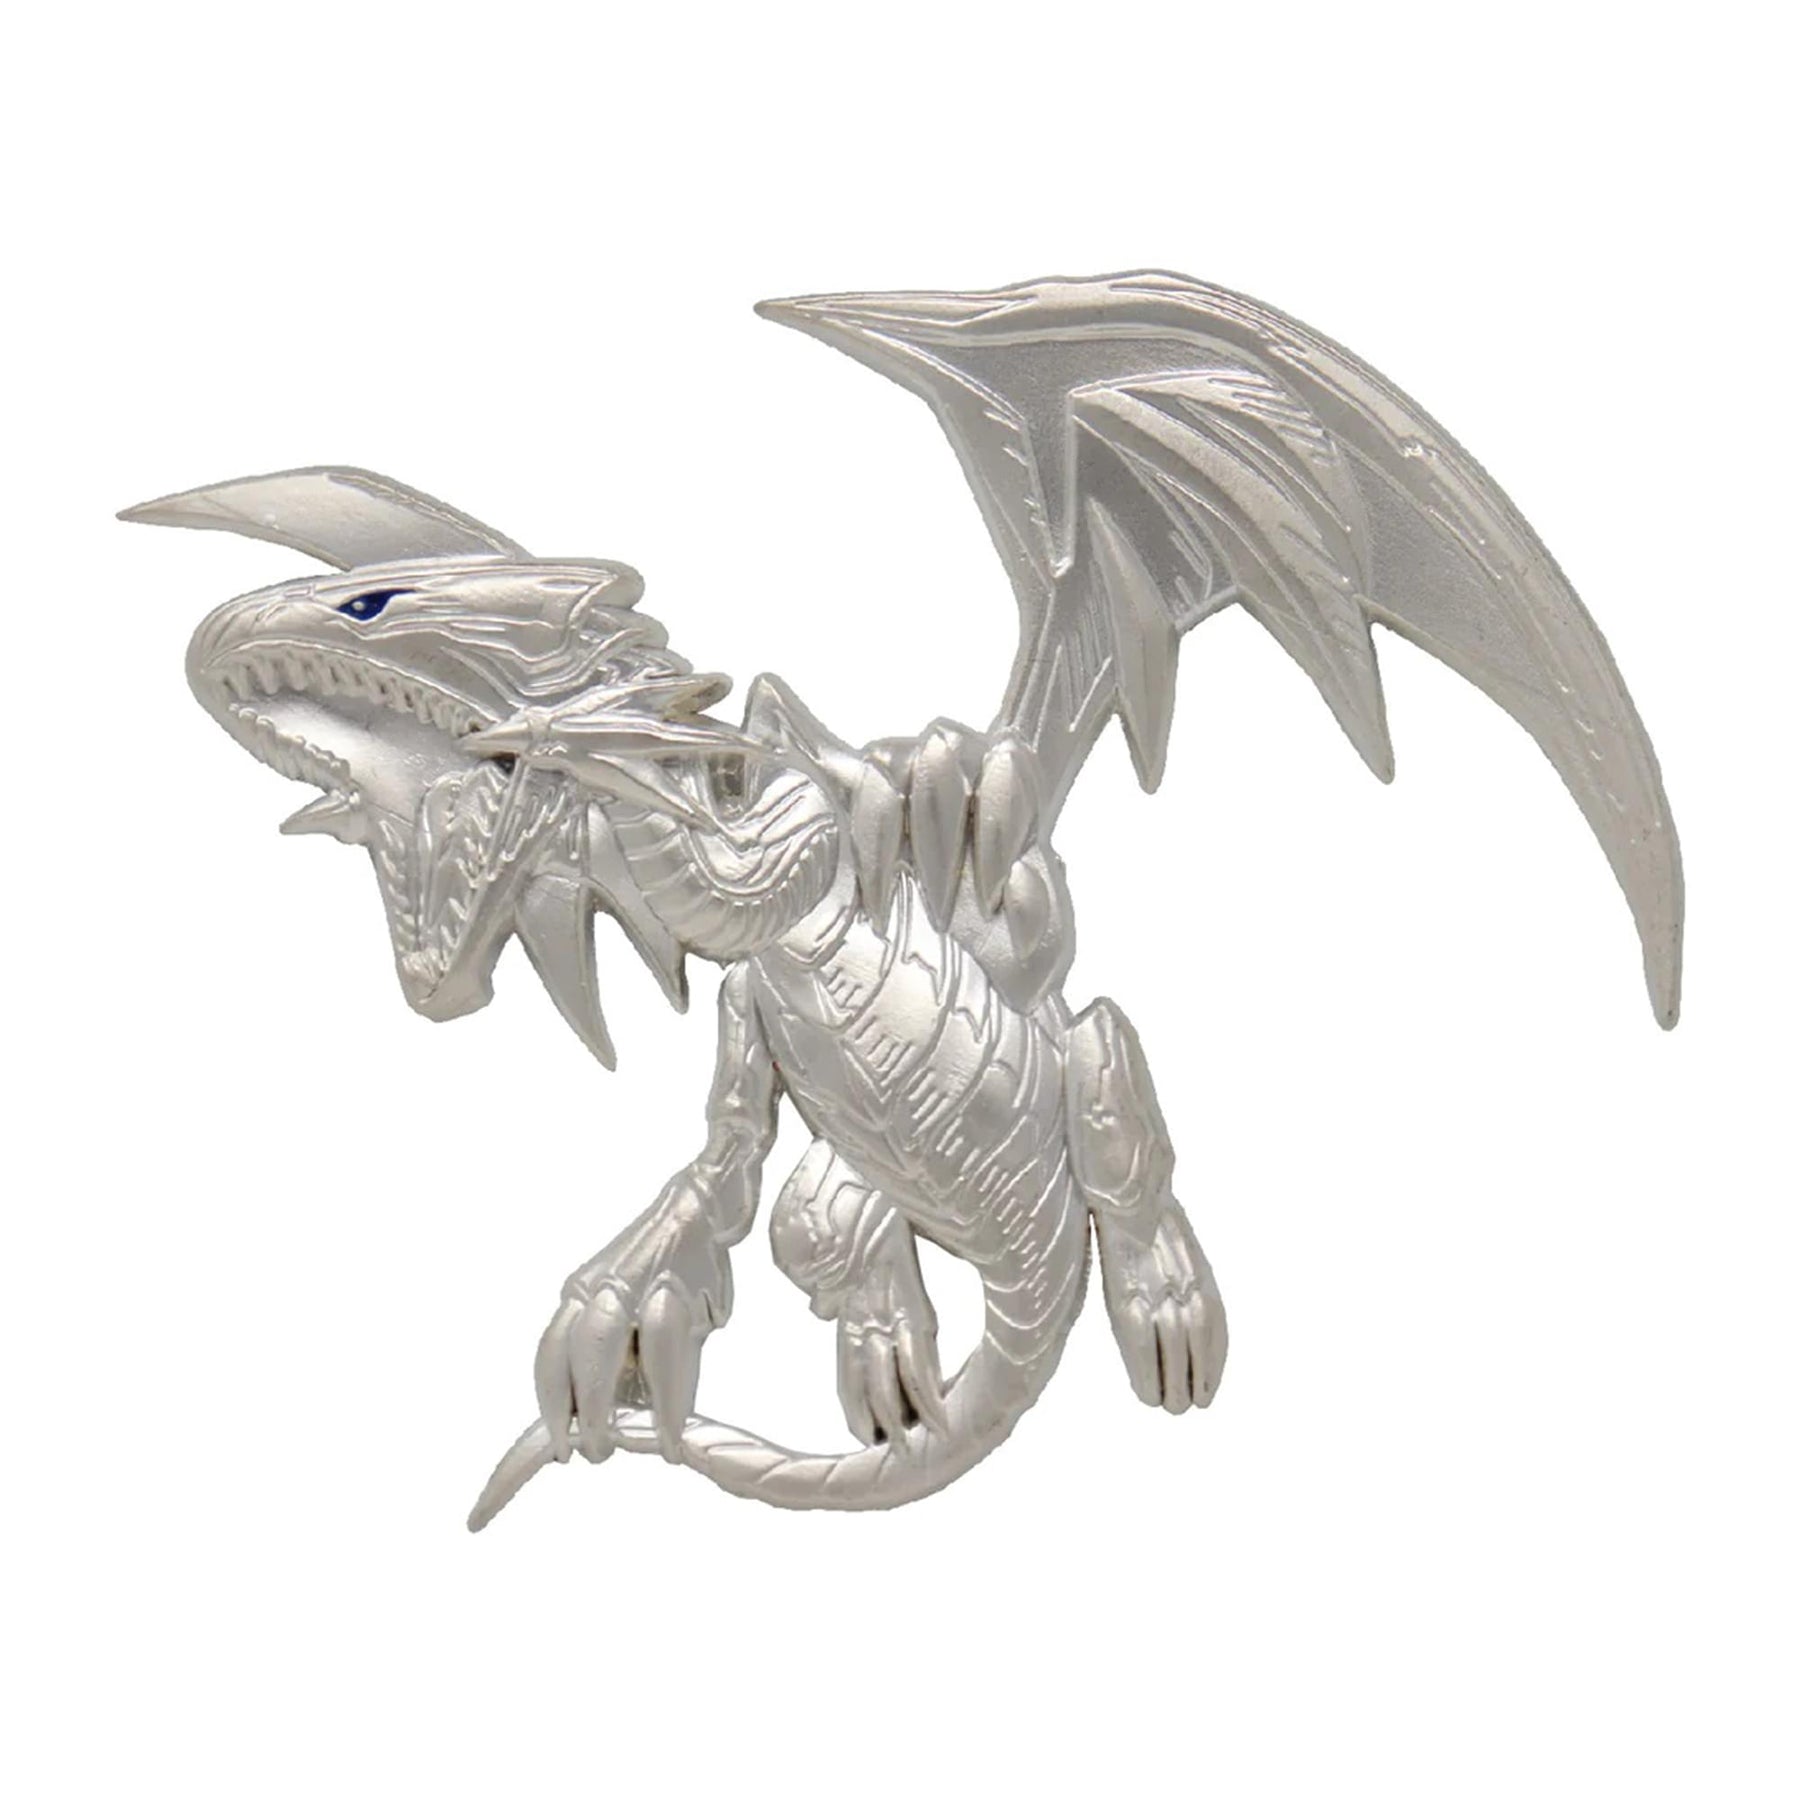 Yu-Gi-Oh! Limited Edition .999 Silver Plated Pin Badge | Blue Eyes White Dragon